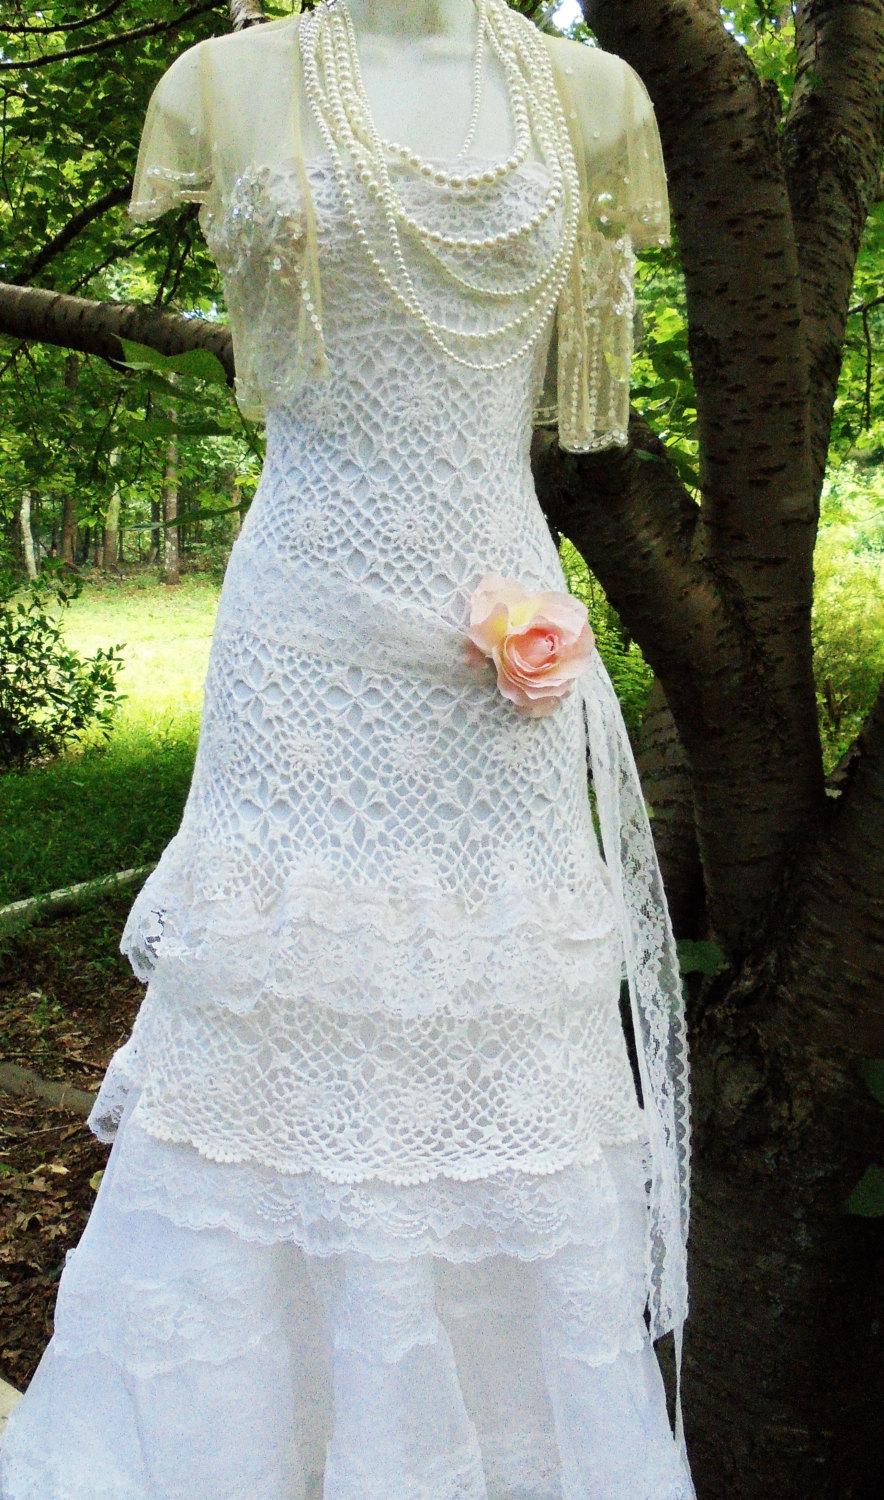 Mariage - Crochet lace dress wedding white ivory strapless lace tulle tiered boho  vintage  bride outdoor  romantic medium by vintage opulence on Etsy